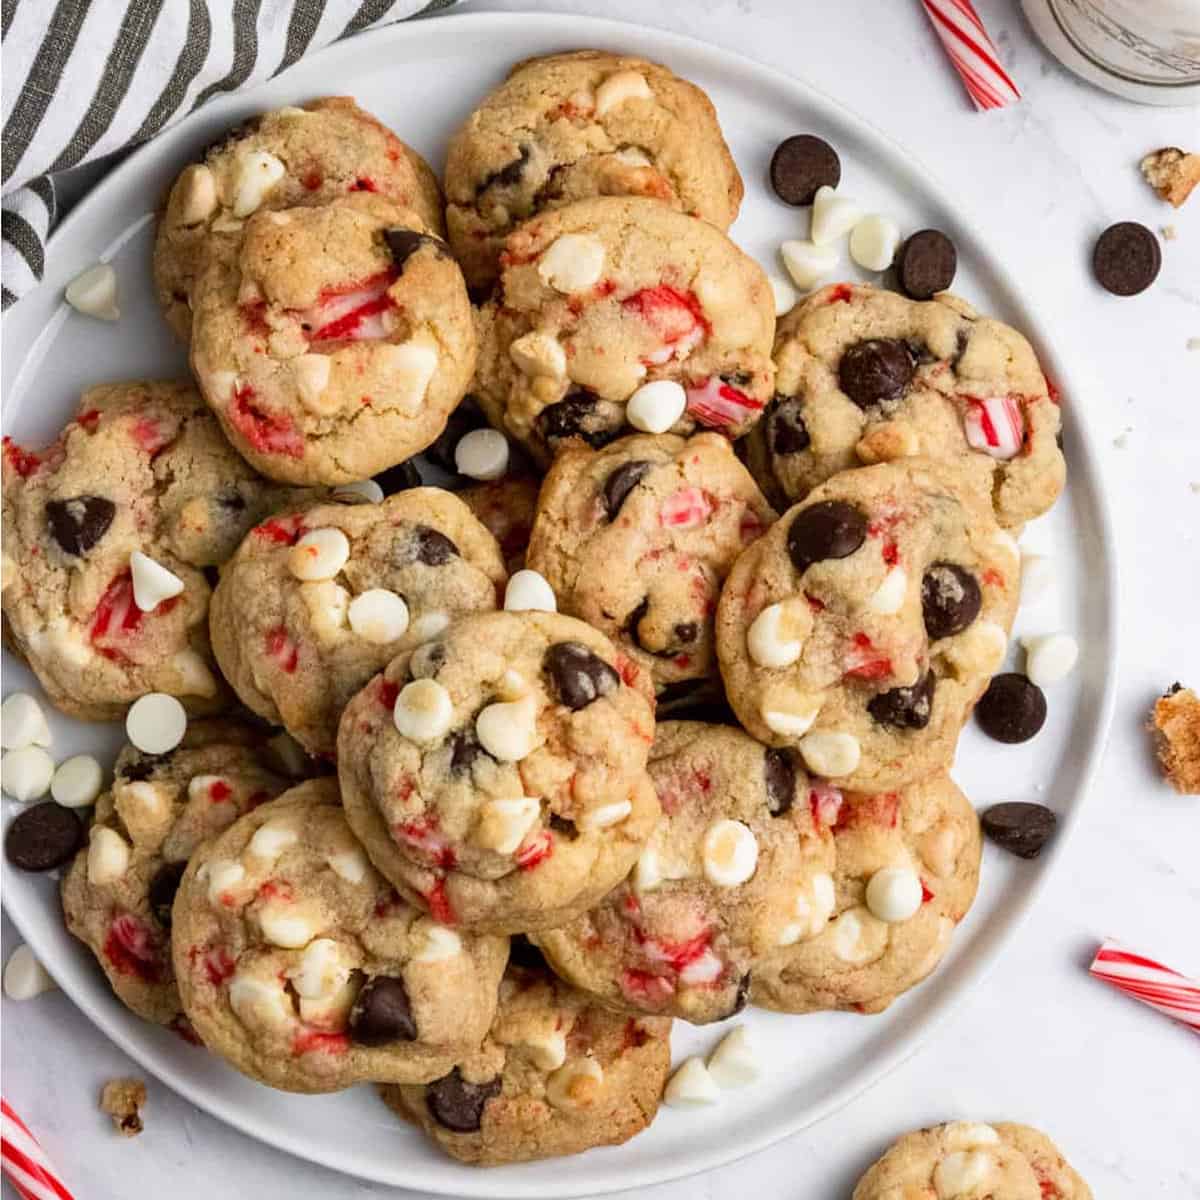 A big plate of cookies with pieces of candy canes.